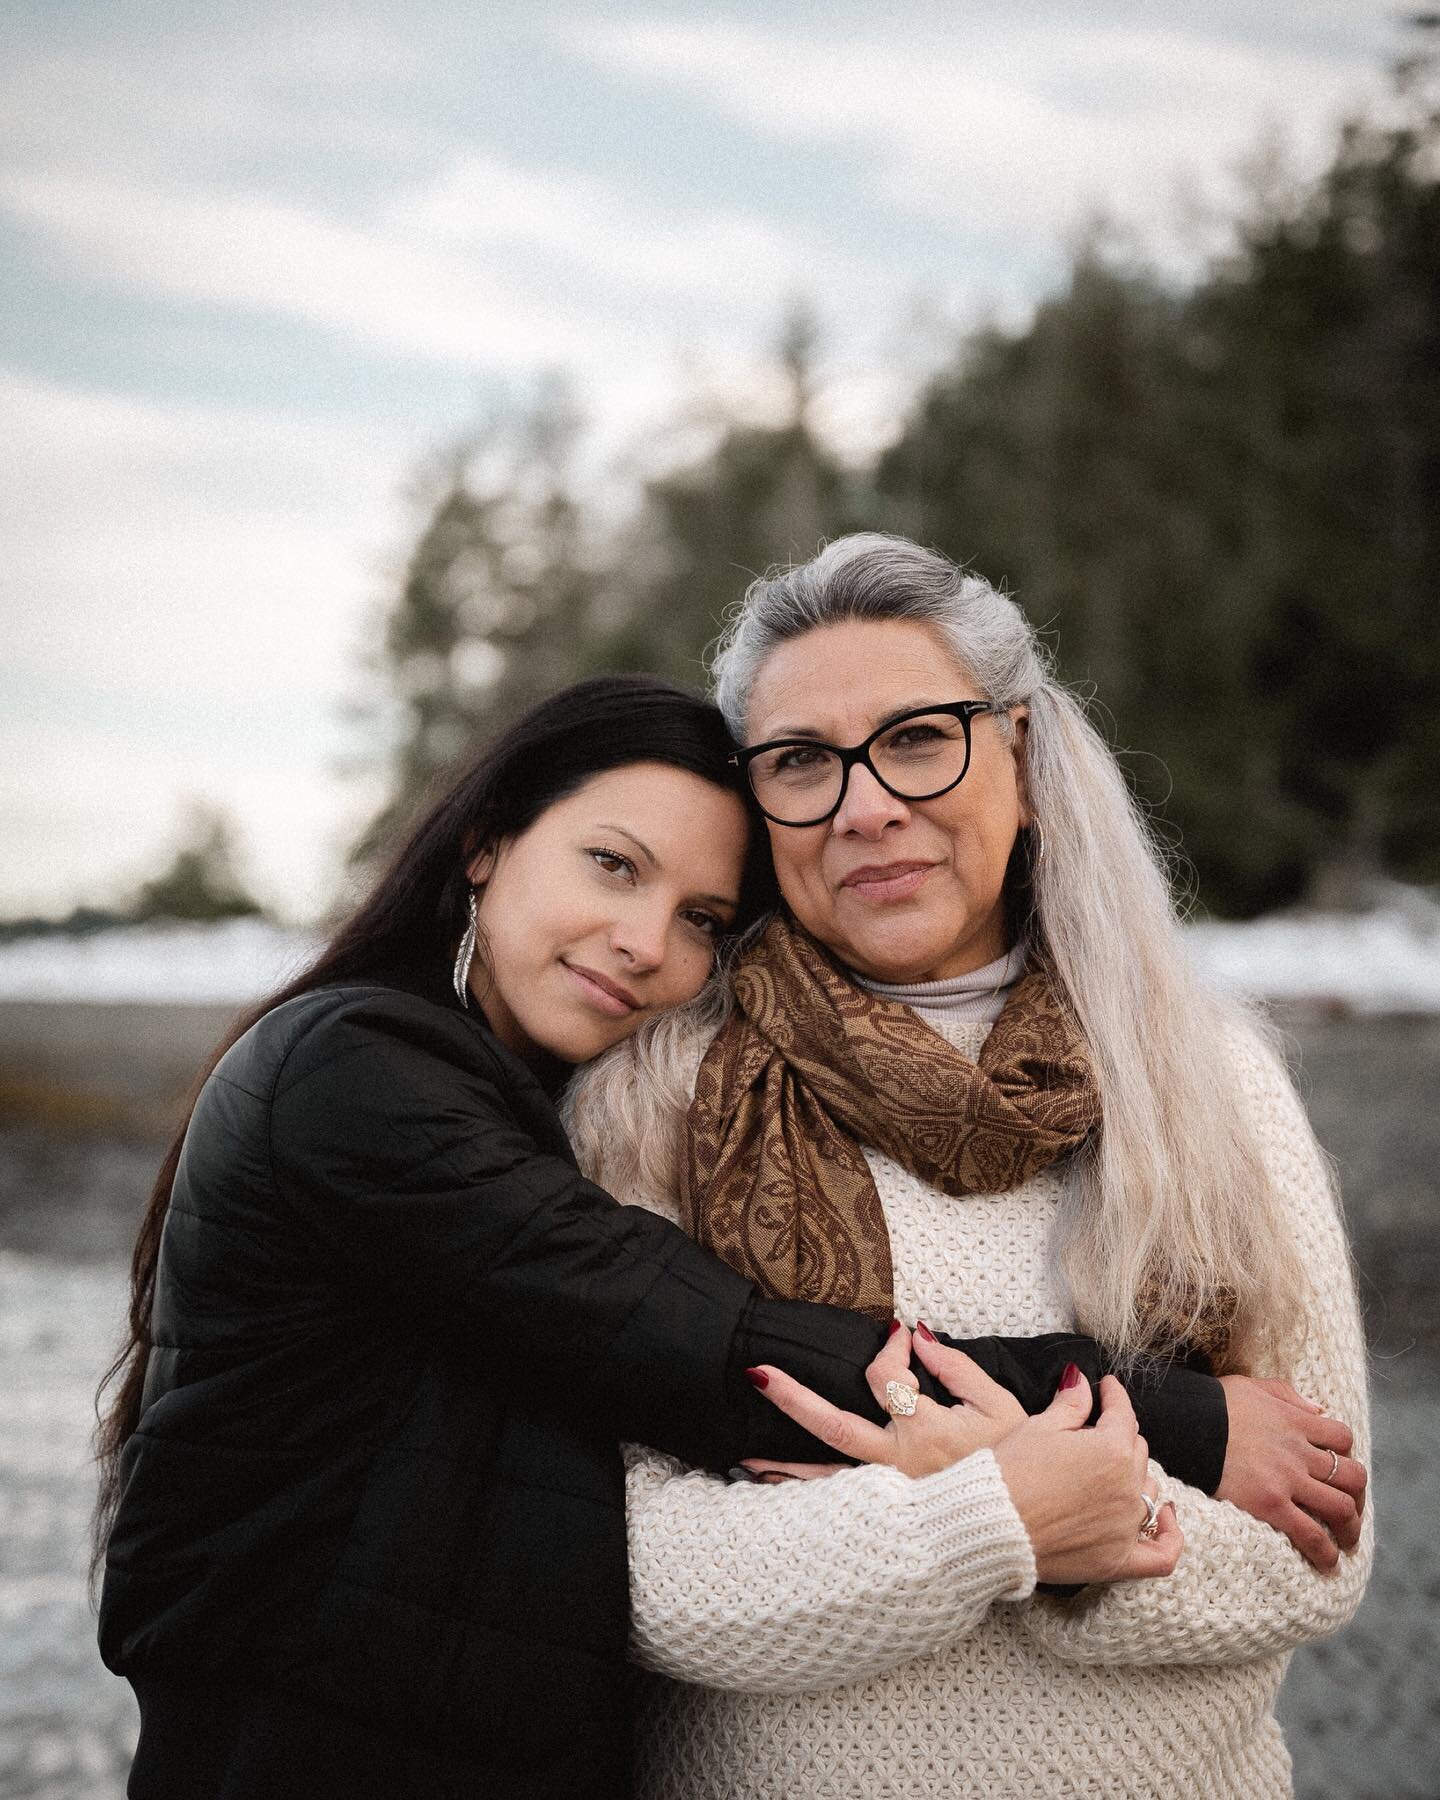 throwback to this beautiful mother + daughter session from last winter ❄️&thinsp;
&thinsp;&thinsp;&thinsp;
&thinsp;&thinsp;&thinsp;
&thinsp;&thinsp;
&thinsp;
&thinsp;
&thinsp;&thinsp;&thinsp;
&thinsp;&thinsp;&thinsp;&thinsp;&thinsp;
#campbellriver #b